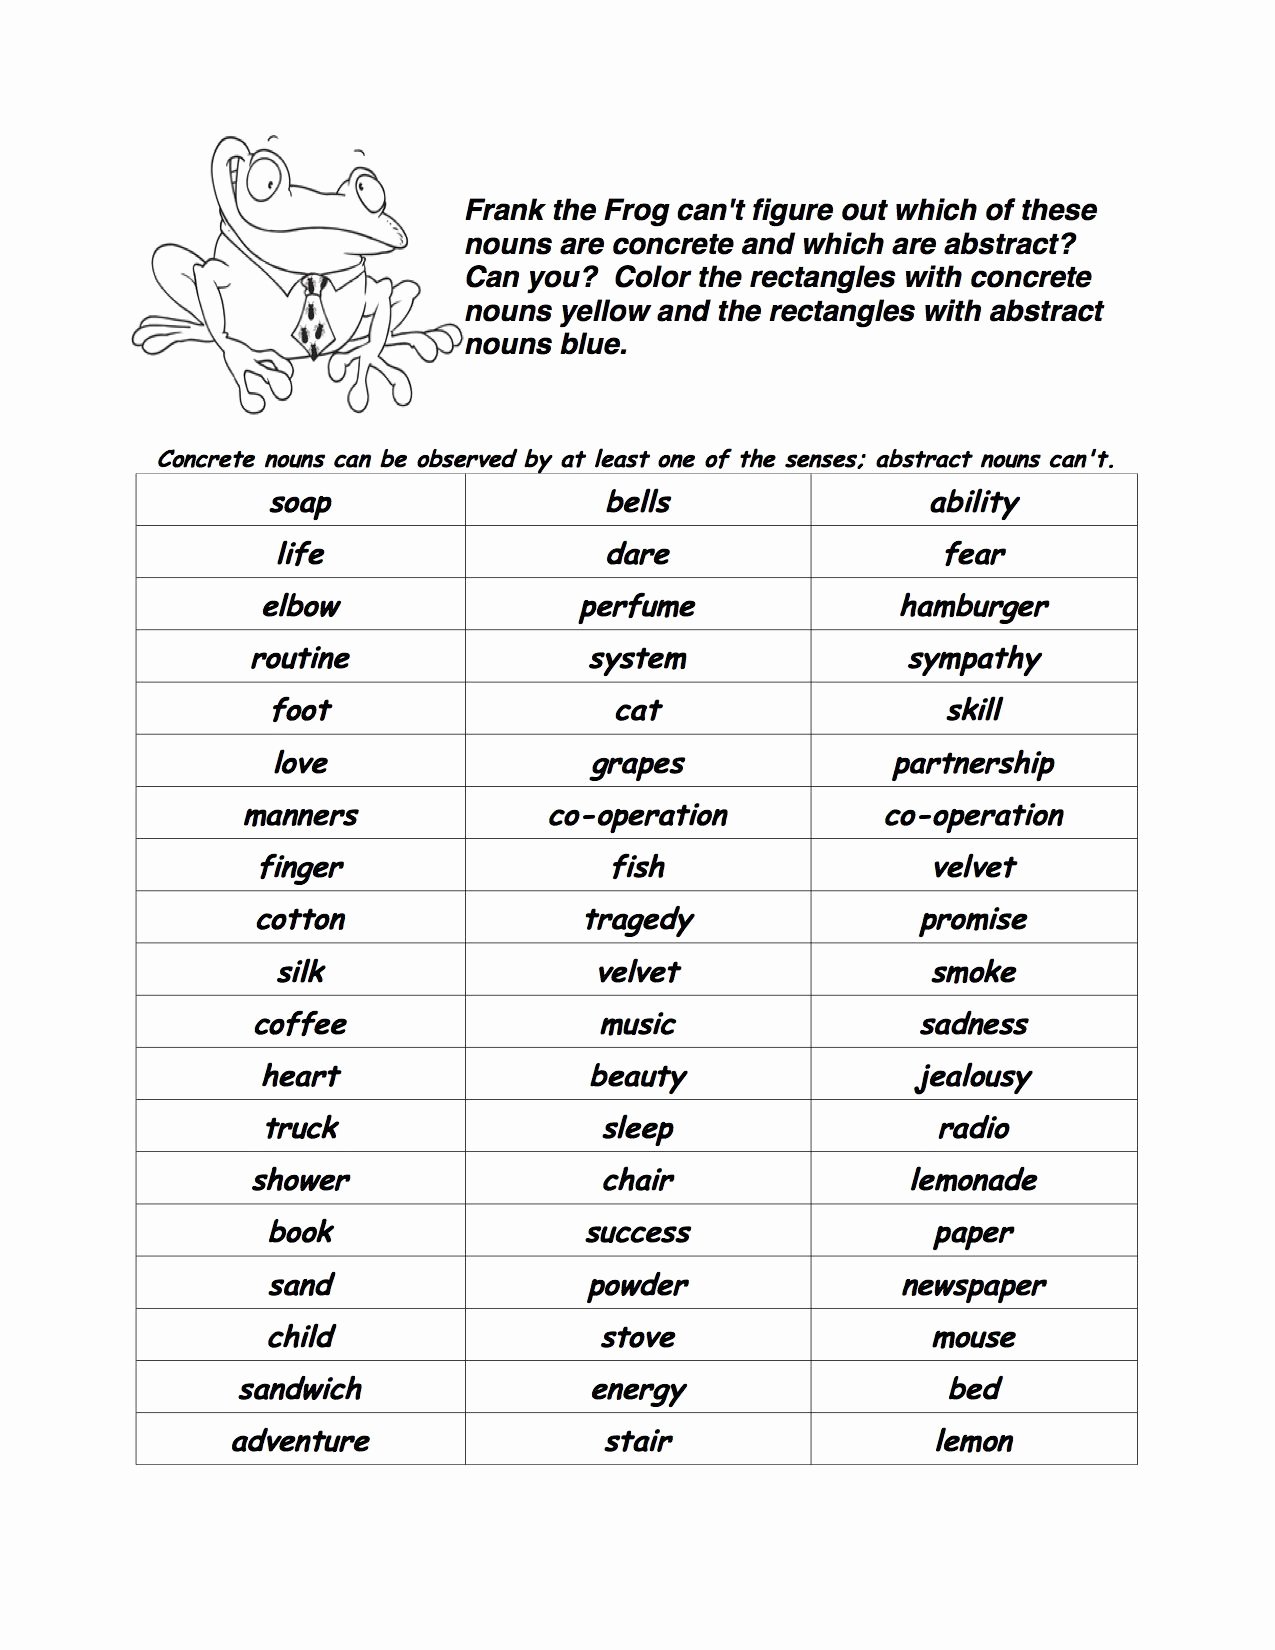 50-concrete-and-abstract-nouns-worksheet